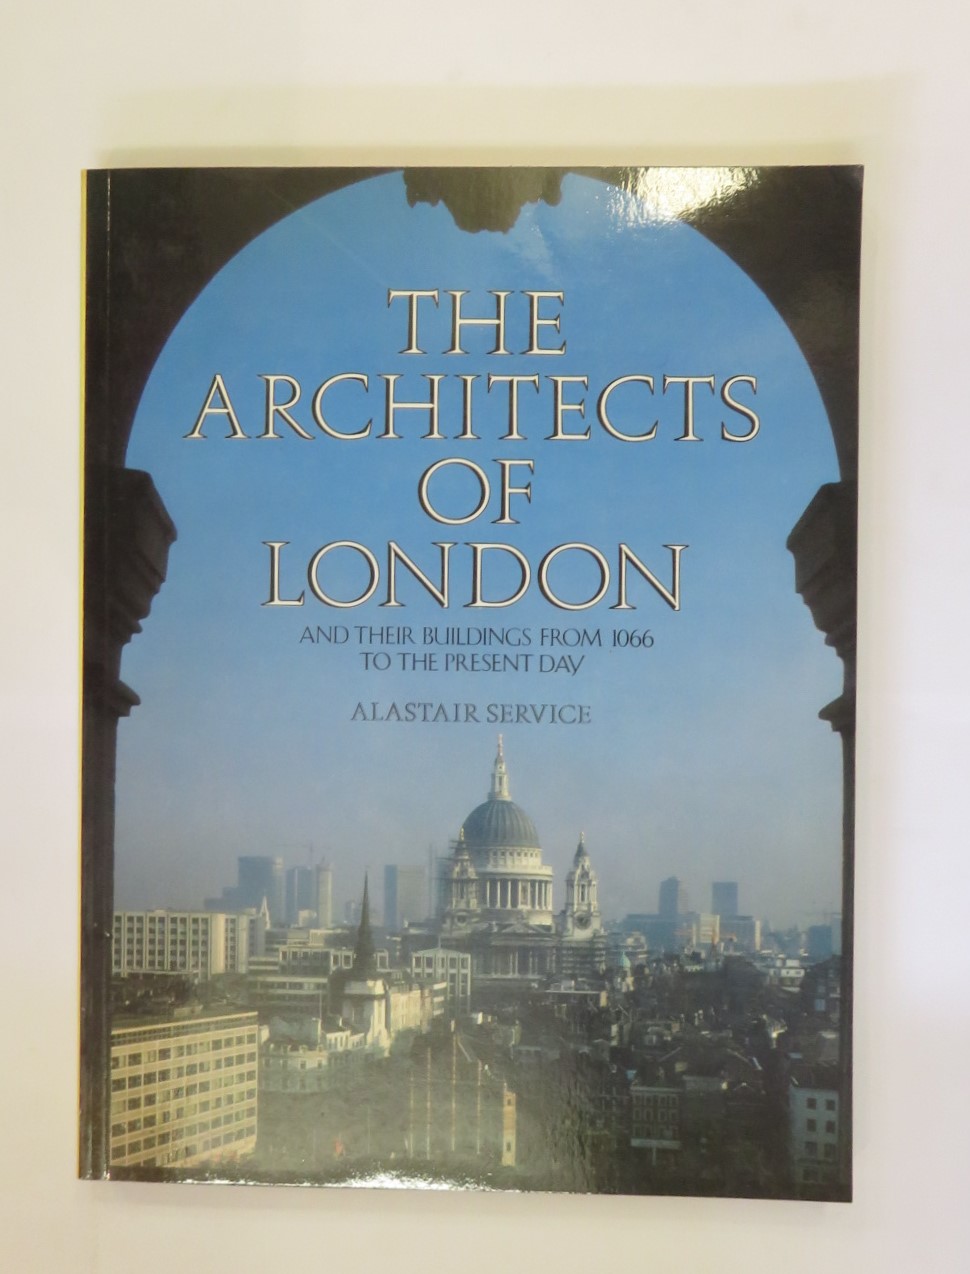 The Architects of London from 1066 to the Present Day